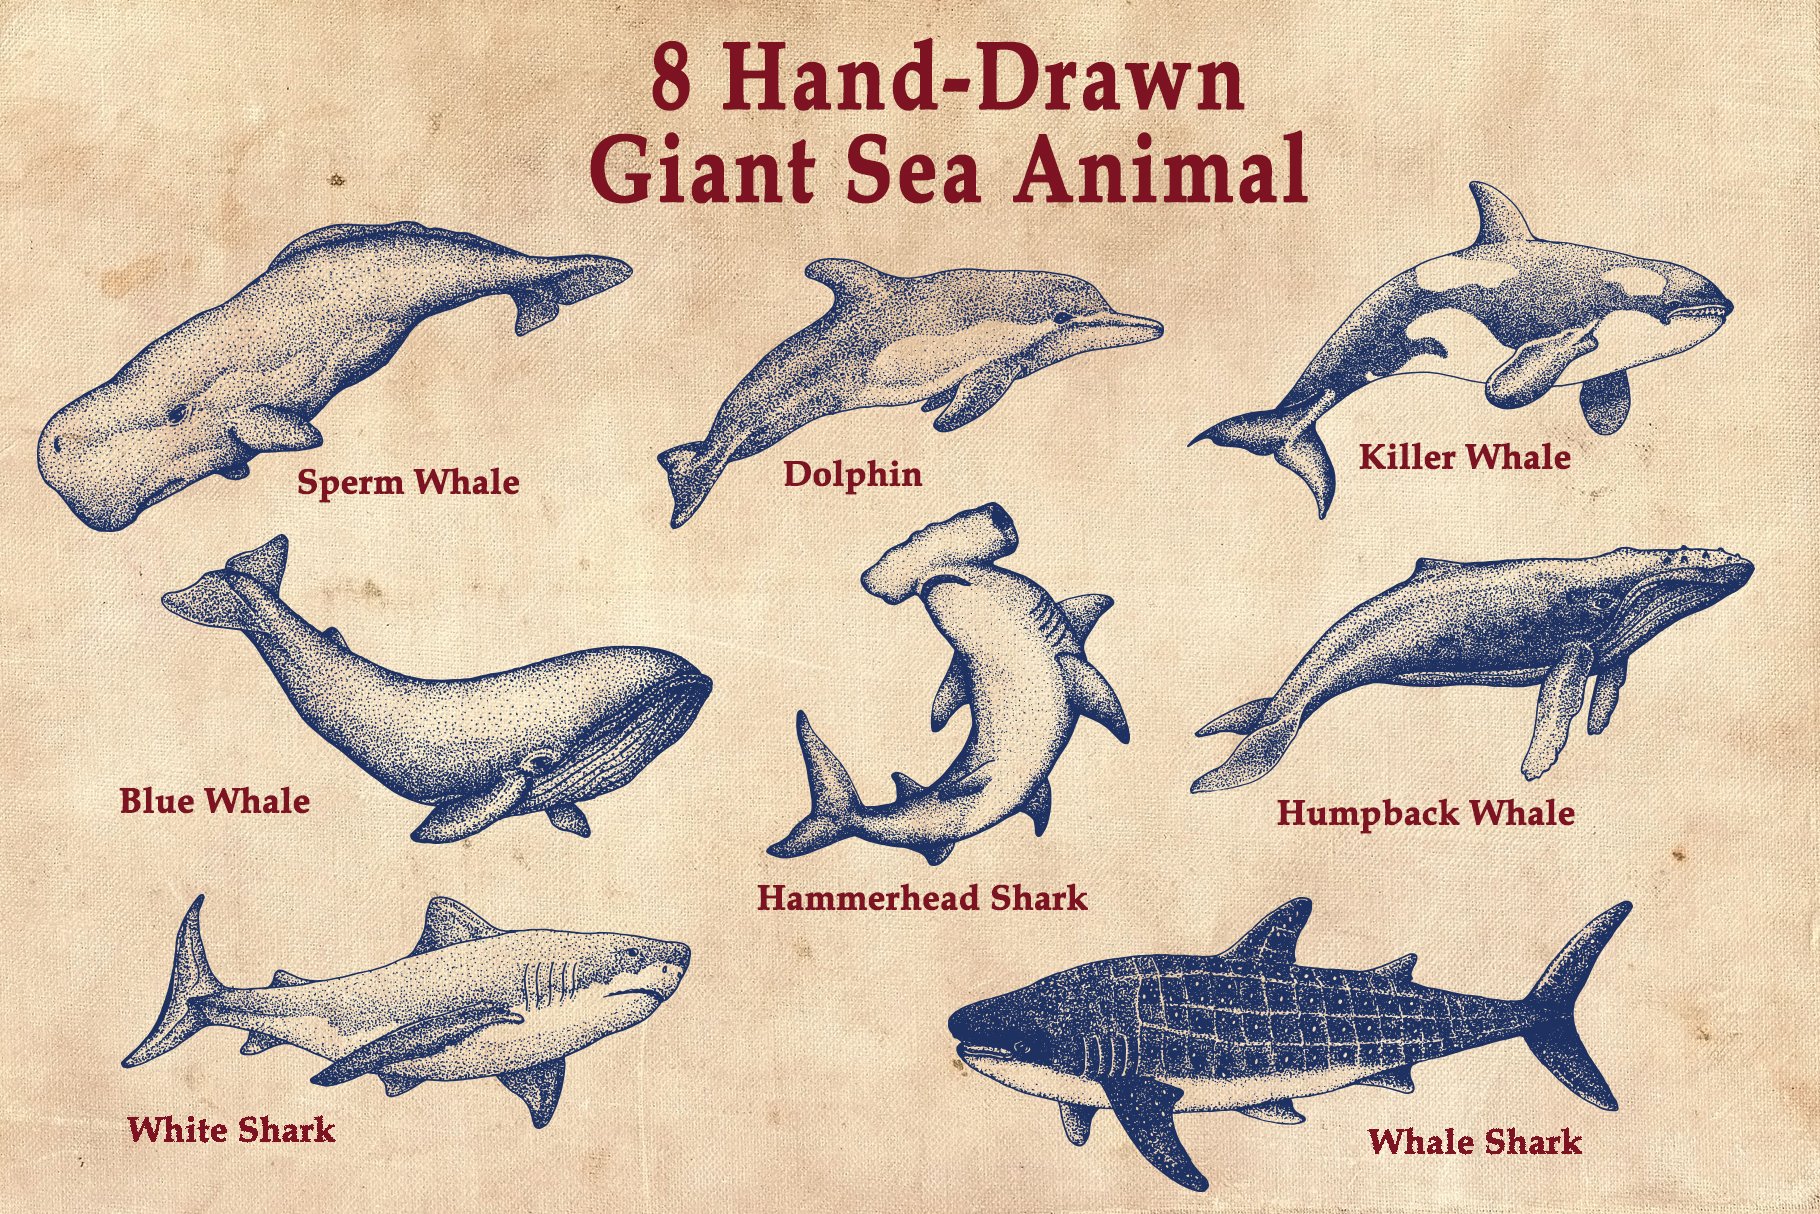 Giant sea animals in a vintage style.